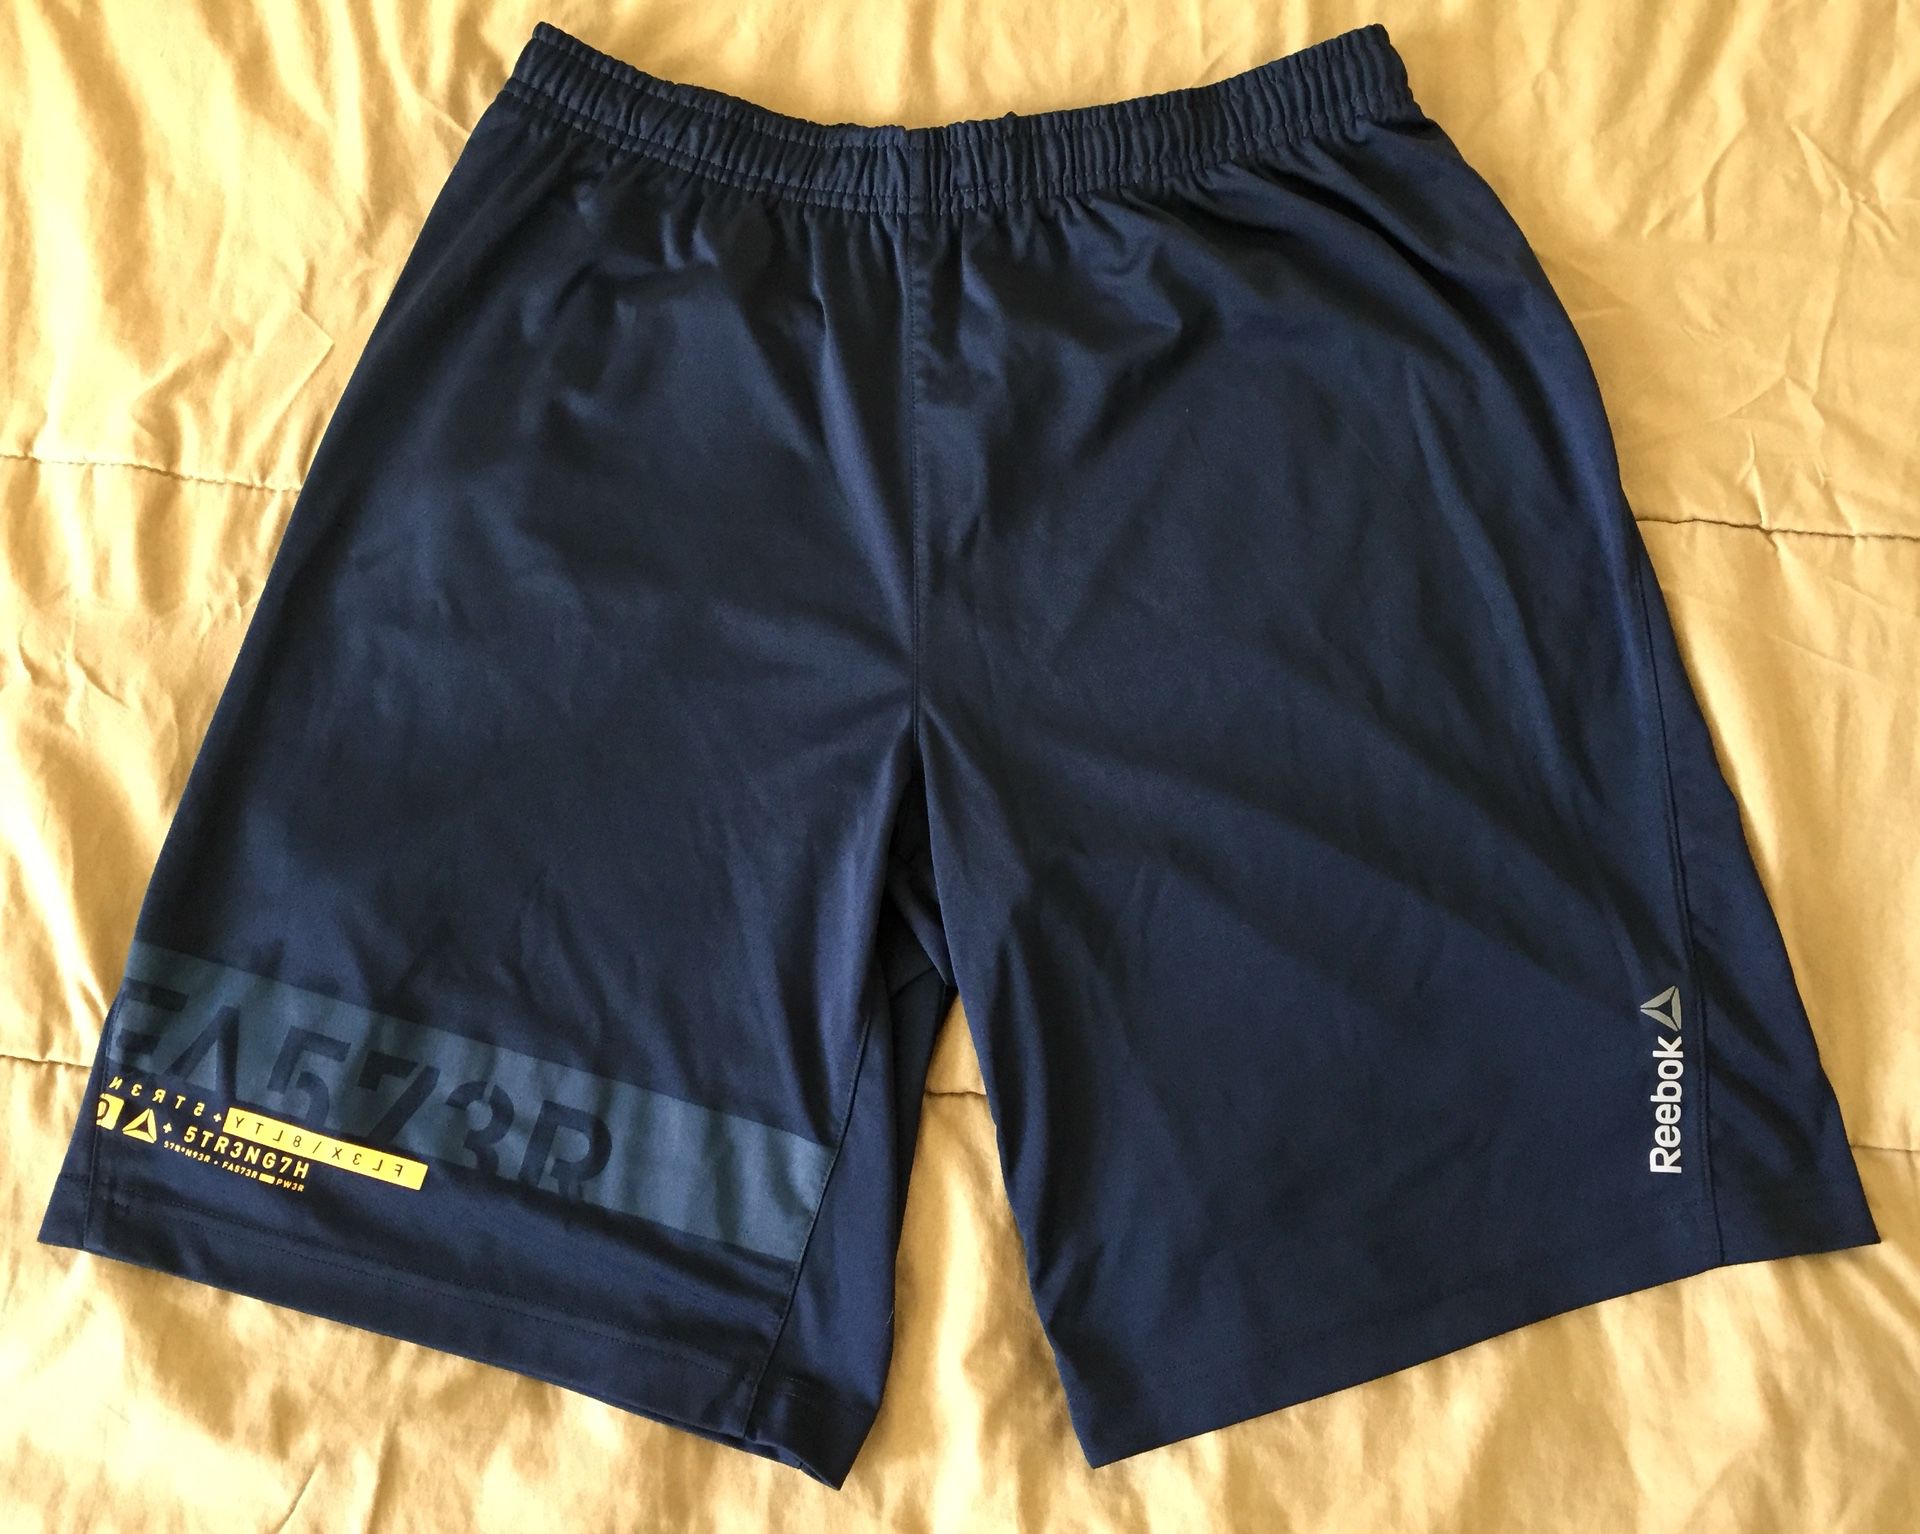 PlayDry Crossfit Blue Training Shorts Mens Sz Large for in Tempe, AZ - OfferUp